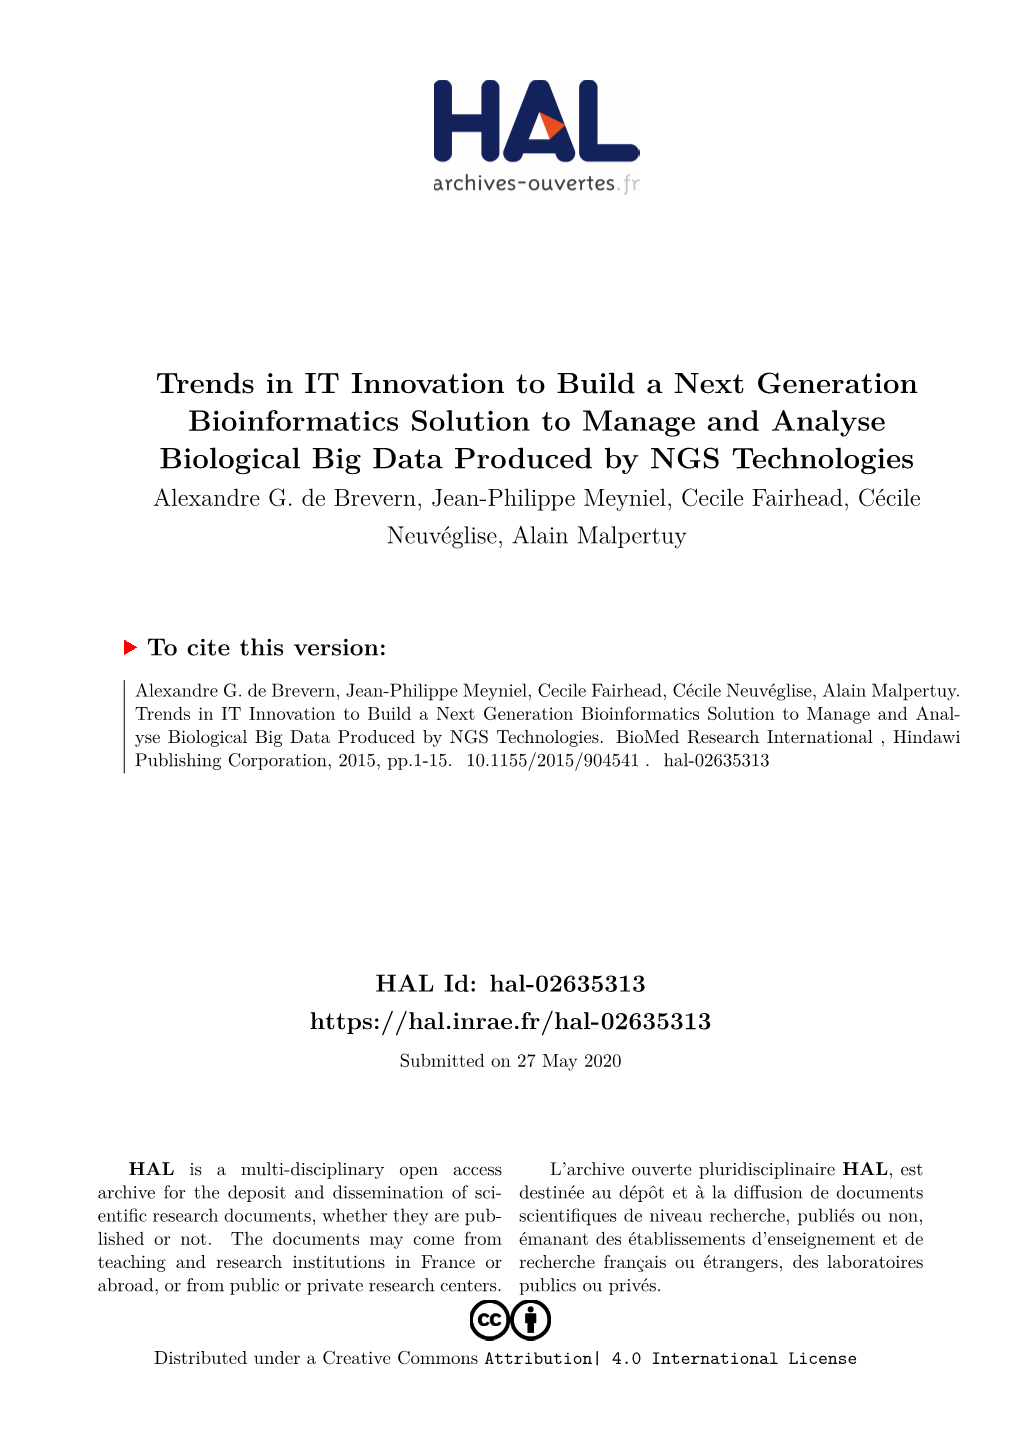 Trends in IT Innovation to Build a Next Generation Bioinformatics Solution to Manage and Analyse Biological Big Data Produced by NGS Technologies Alexandre G